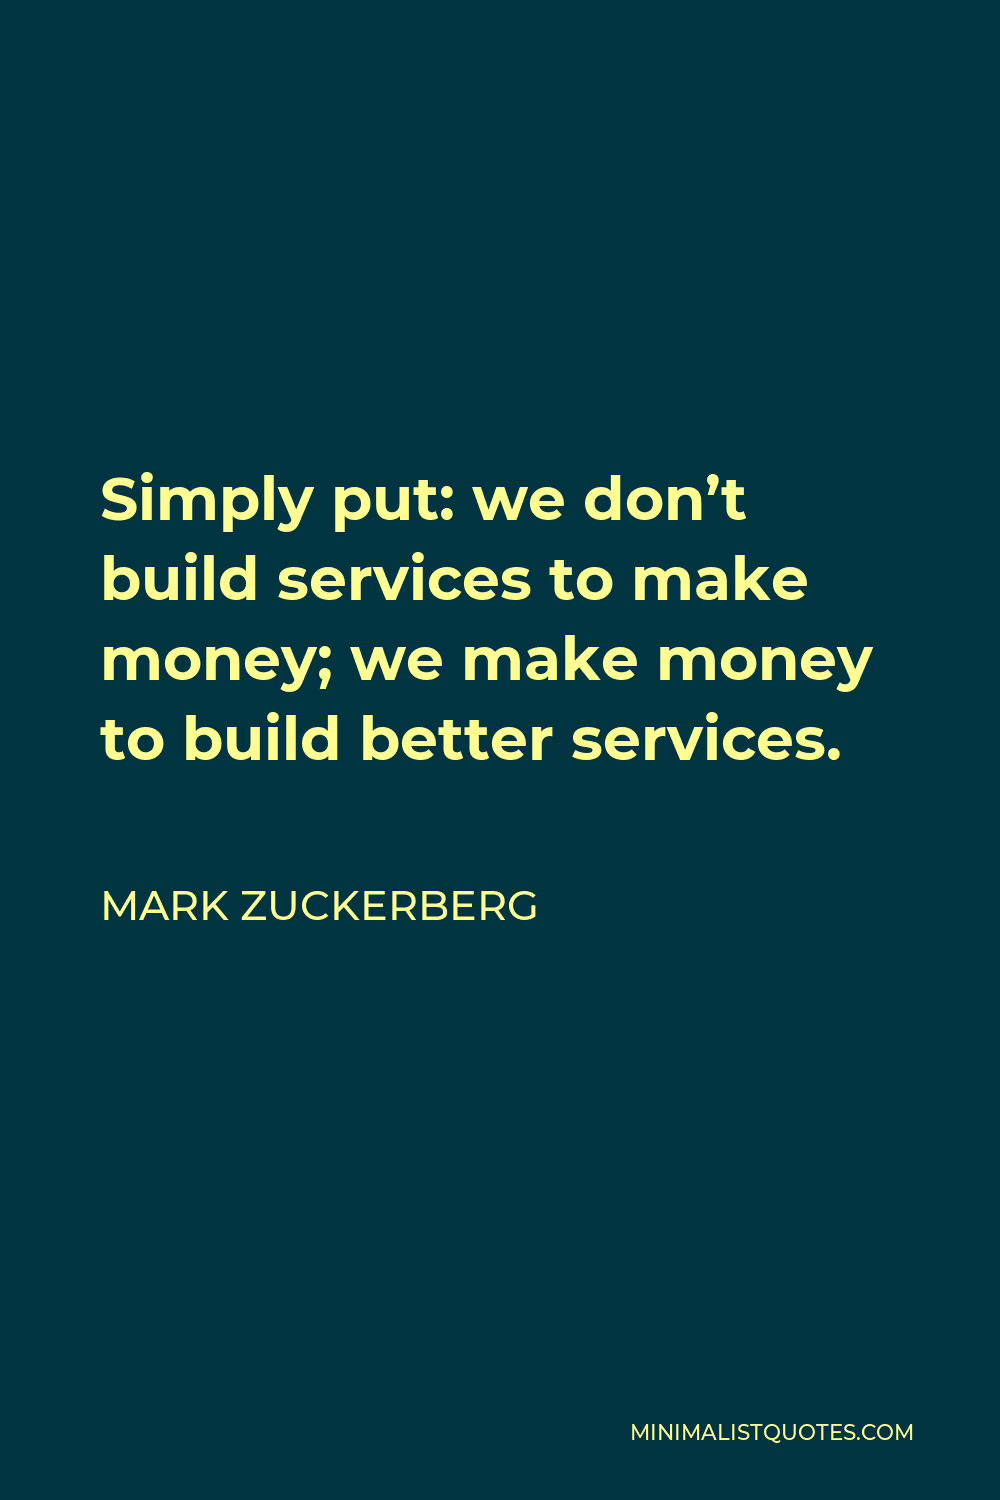 Mark Zuckerberg Quote - Simply put: we don’t build services to make money; we make money to build better services.